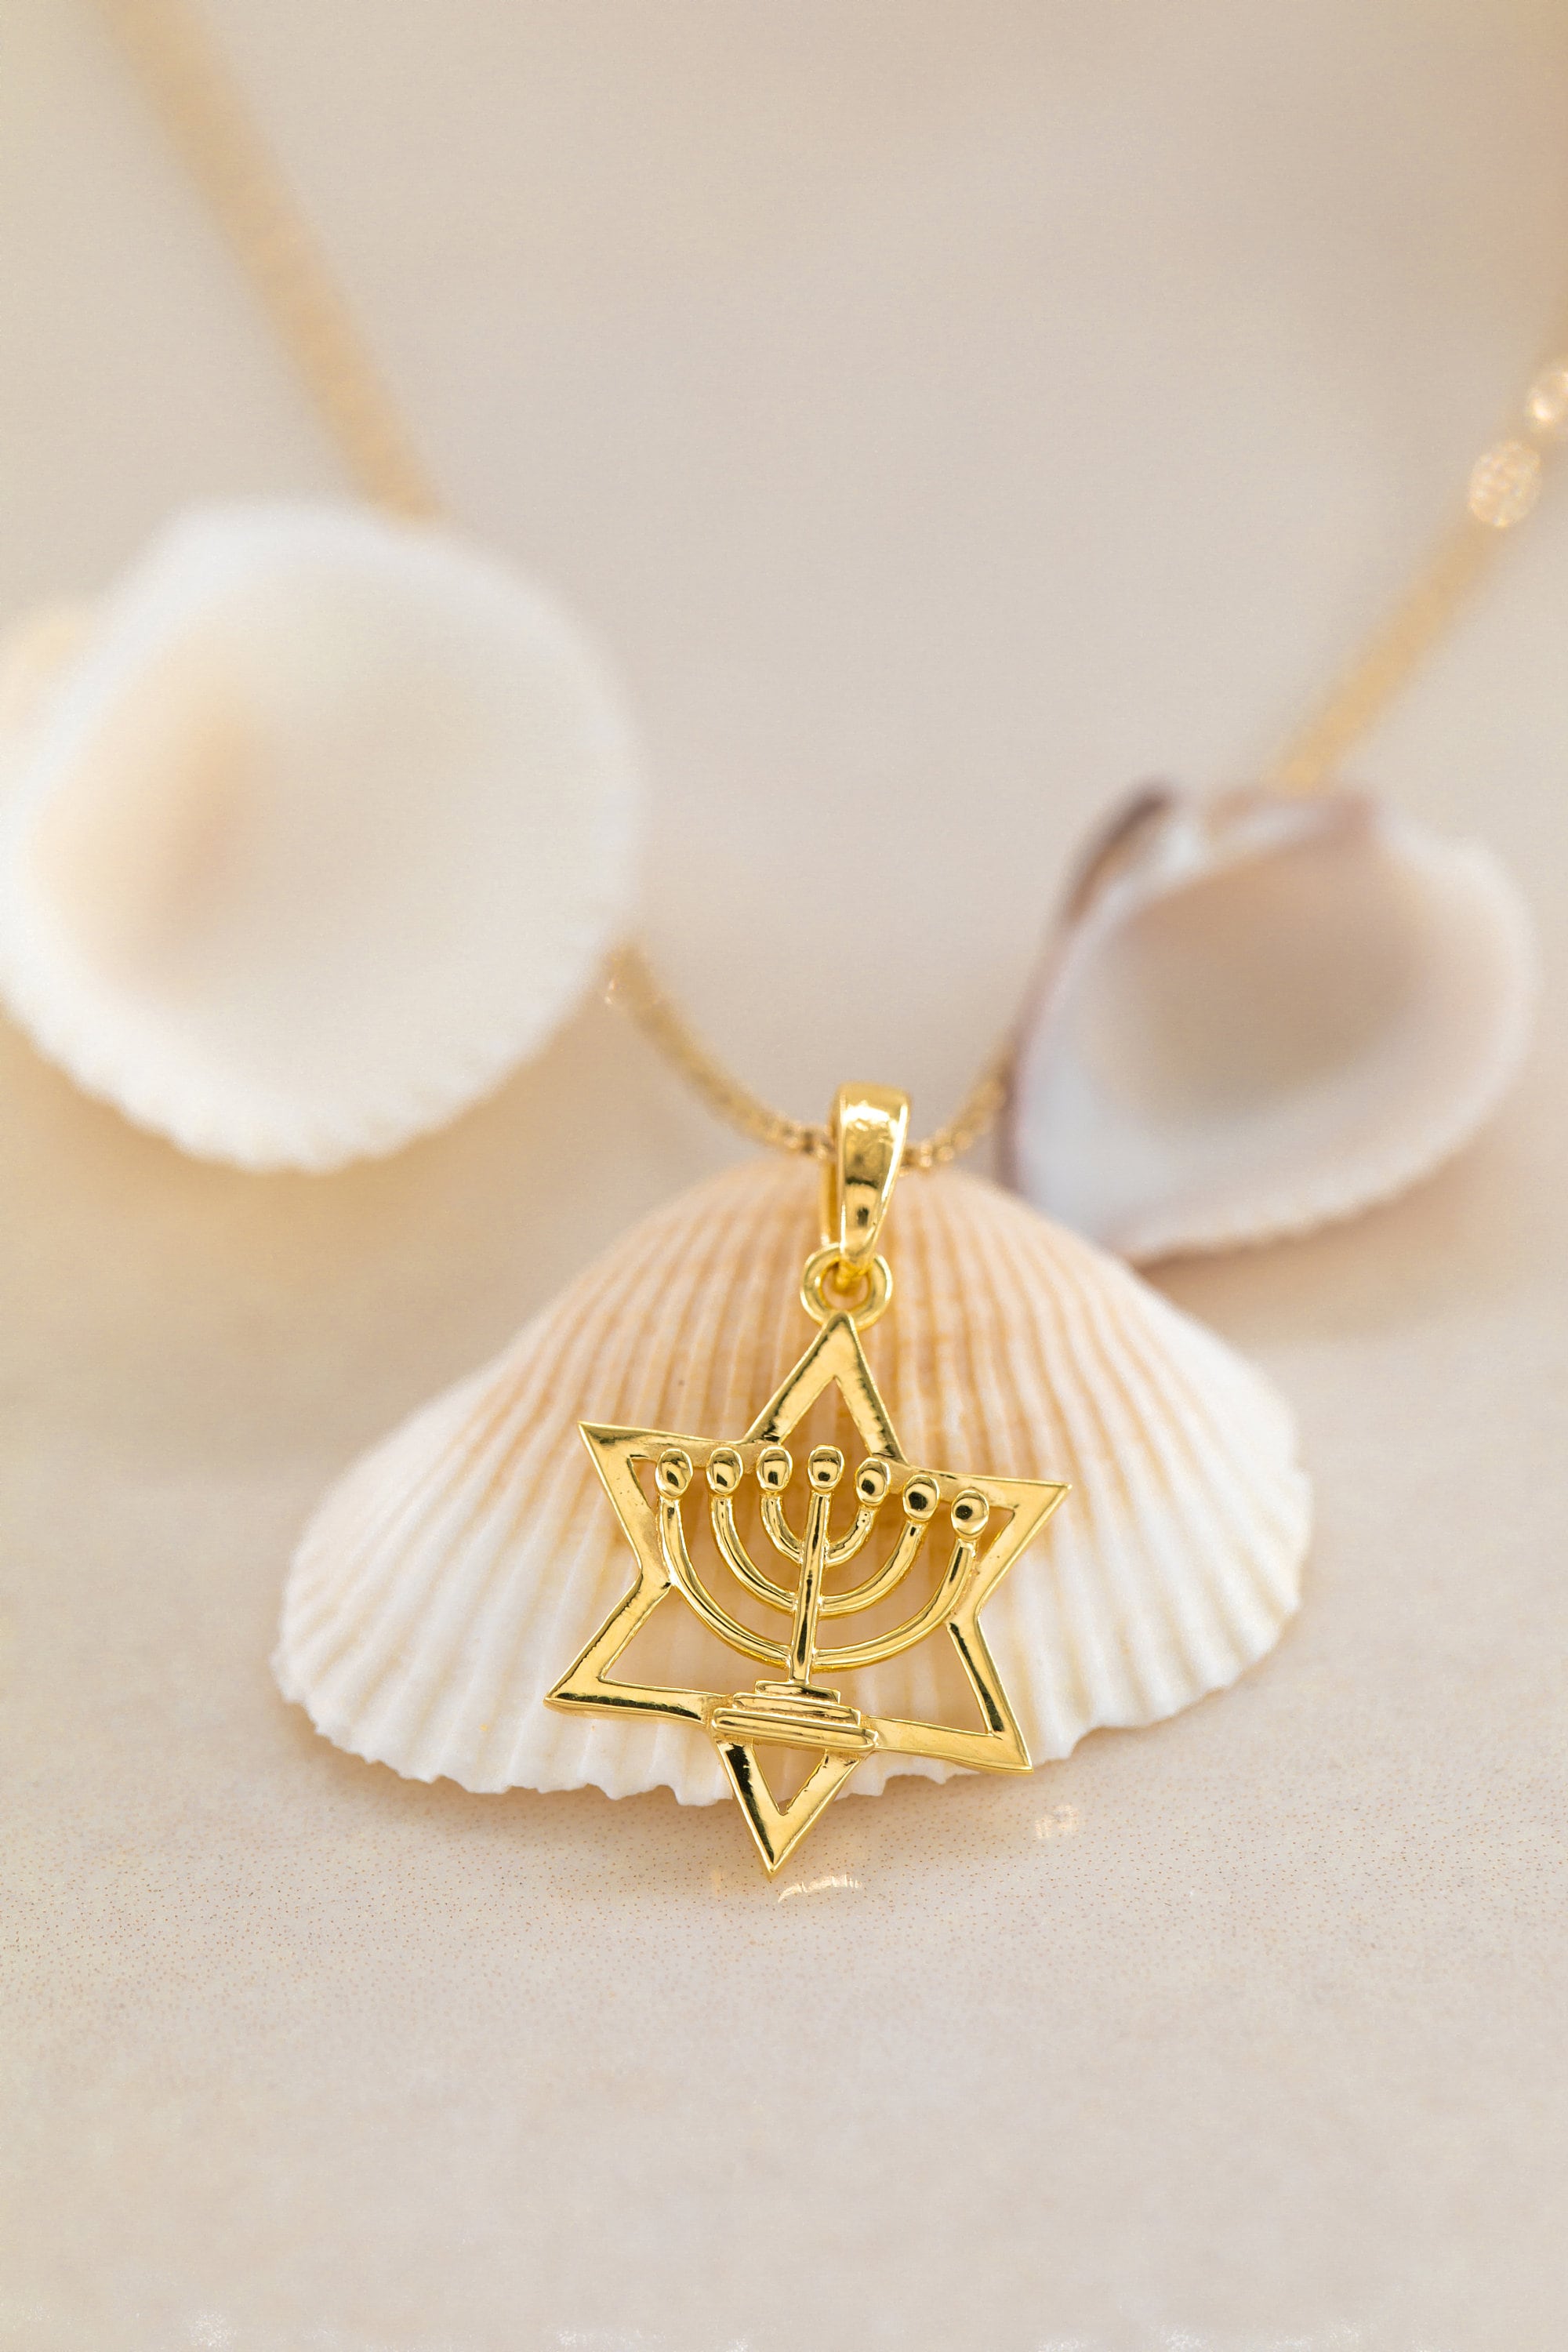 14k Star of David Necklace | Judaism Necklace | Religious Necklace | Juda Necklace | Mother Day Jewelry | 14k Solid Gold Necklace